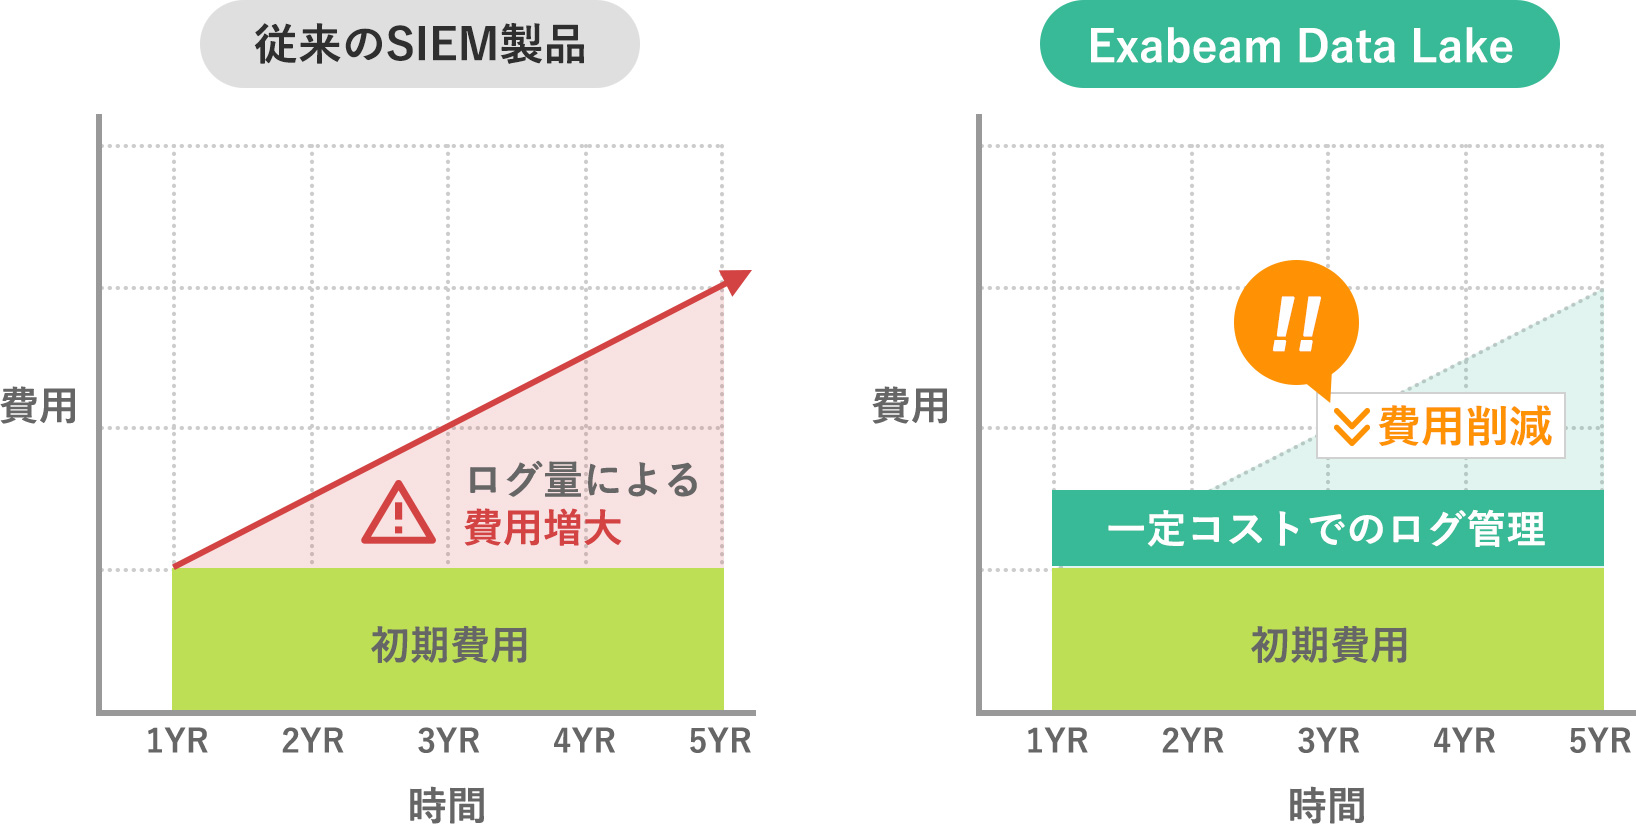 Comparison diagram of traditional SIEM products and Exabeam Data Lake